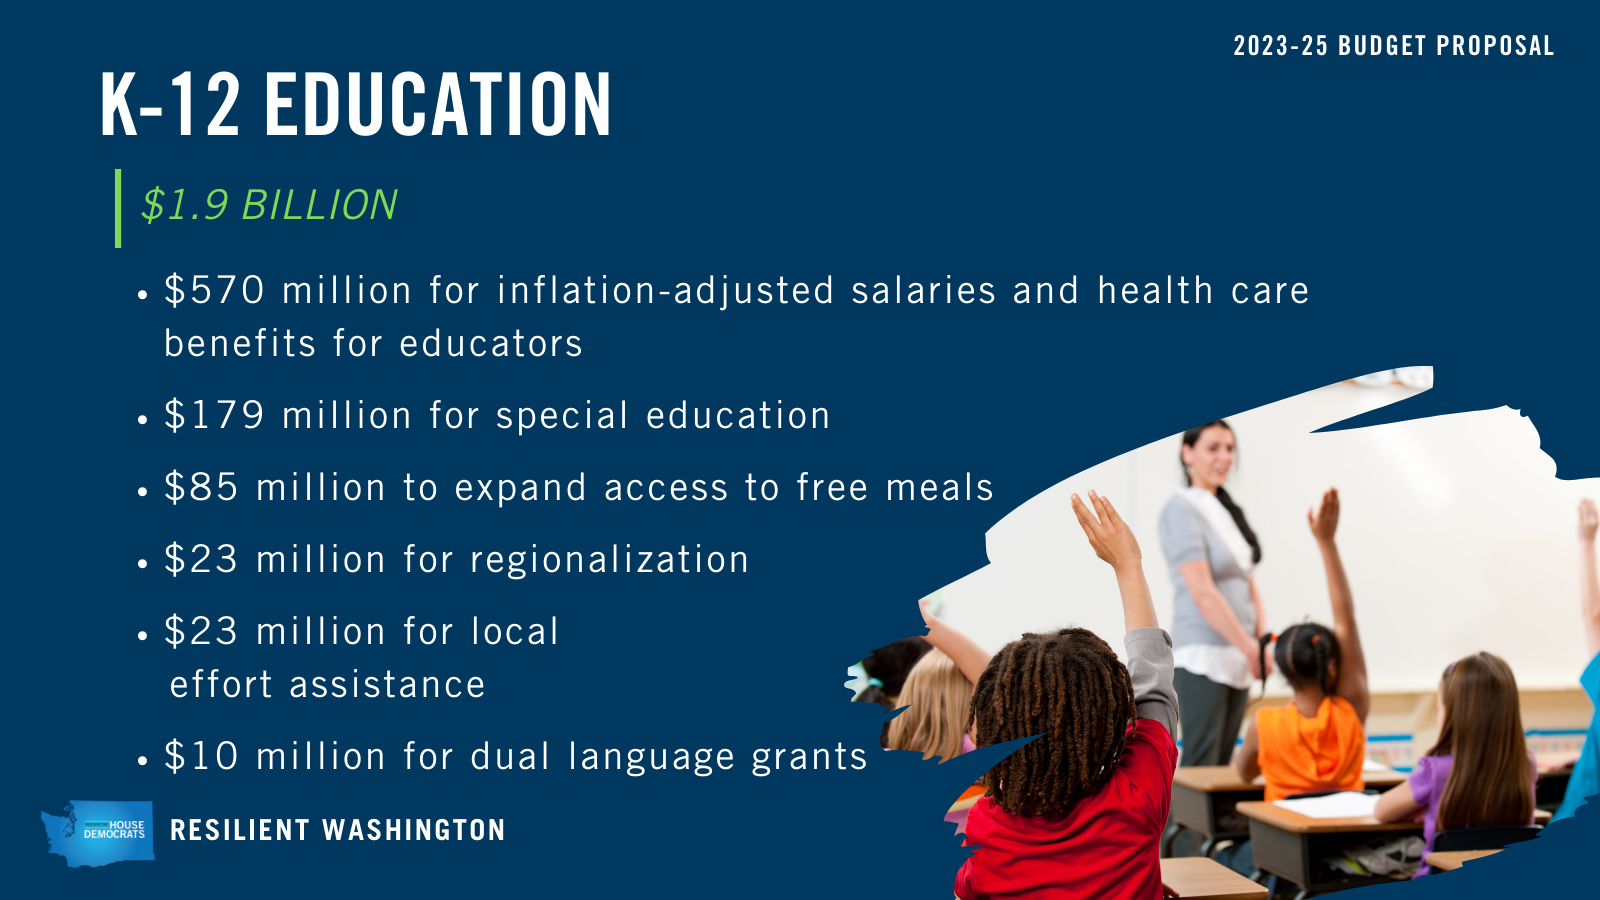 K-12 Education receives $1.9 billion dollars in investments. This includes: $570 million for inflation-adjusted salaries and health care benefits for educators, $179 million for special education, $85 million to expand access to free meals, $23 million for regionalization, $23 million for local effort assistance, and $10 million for dual language grants.